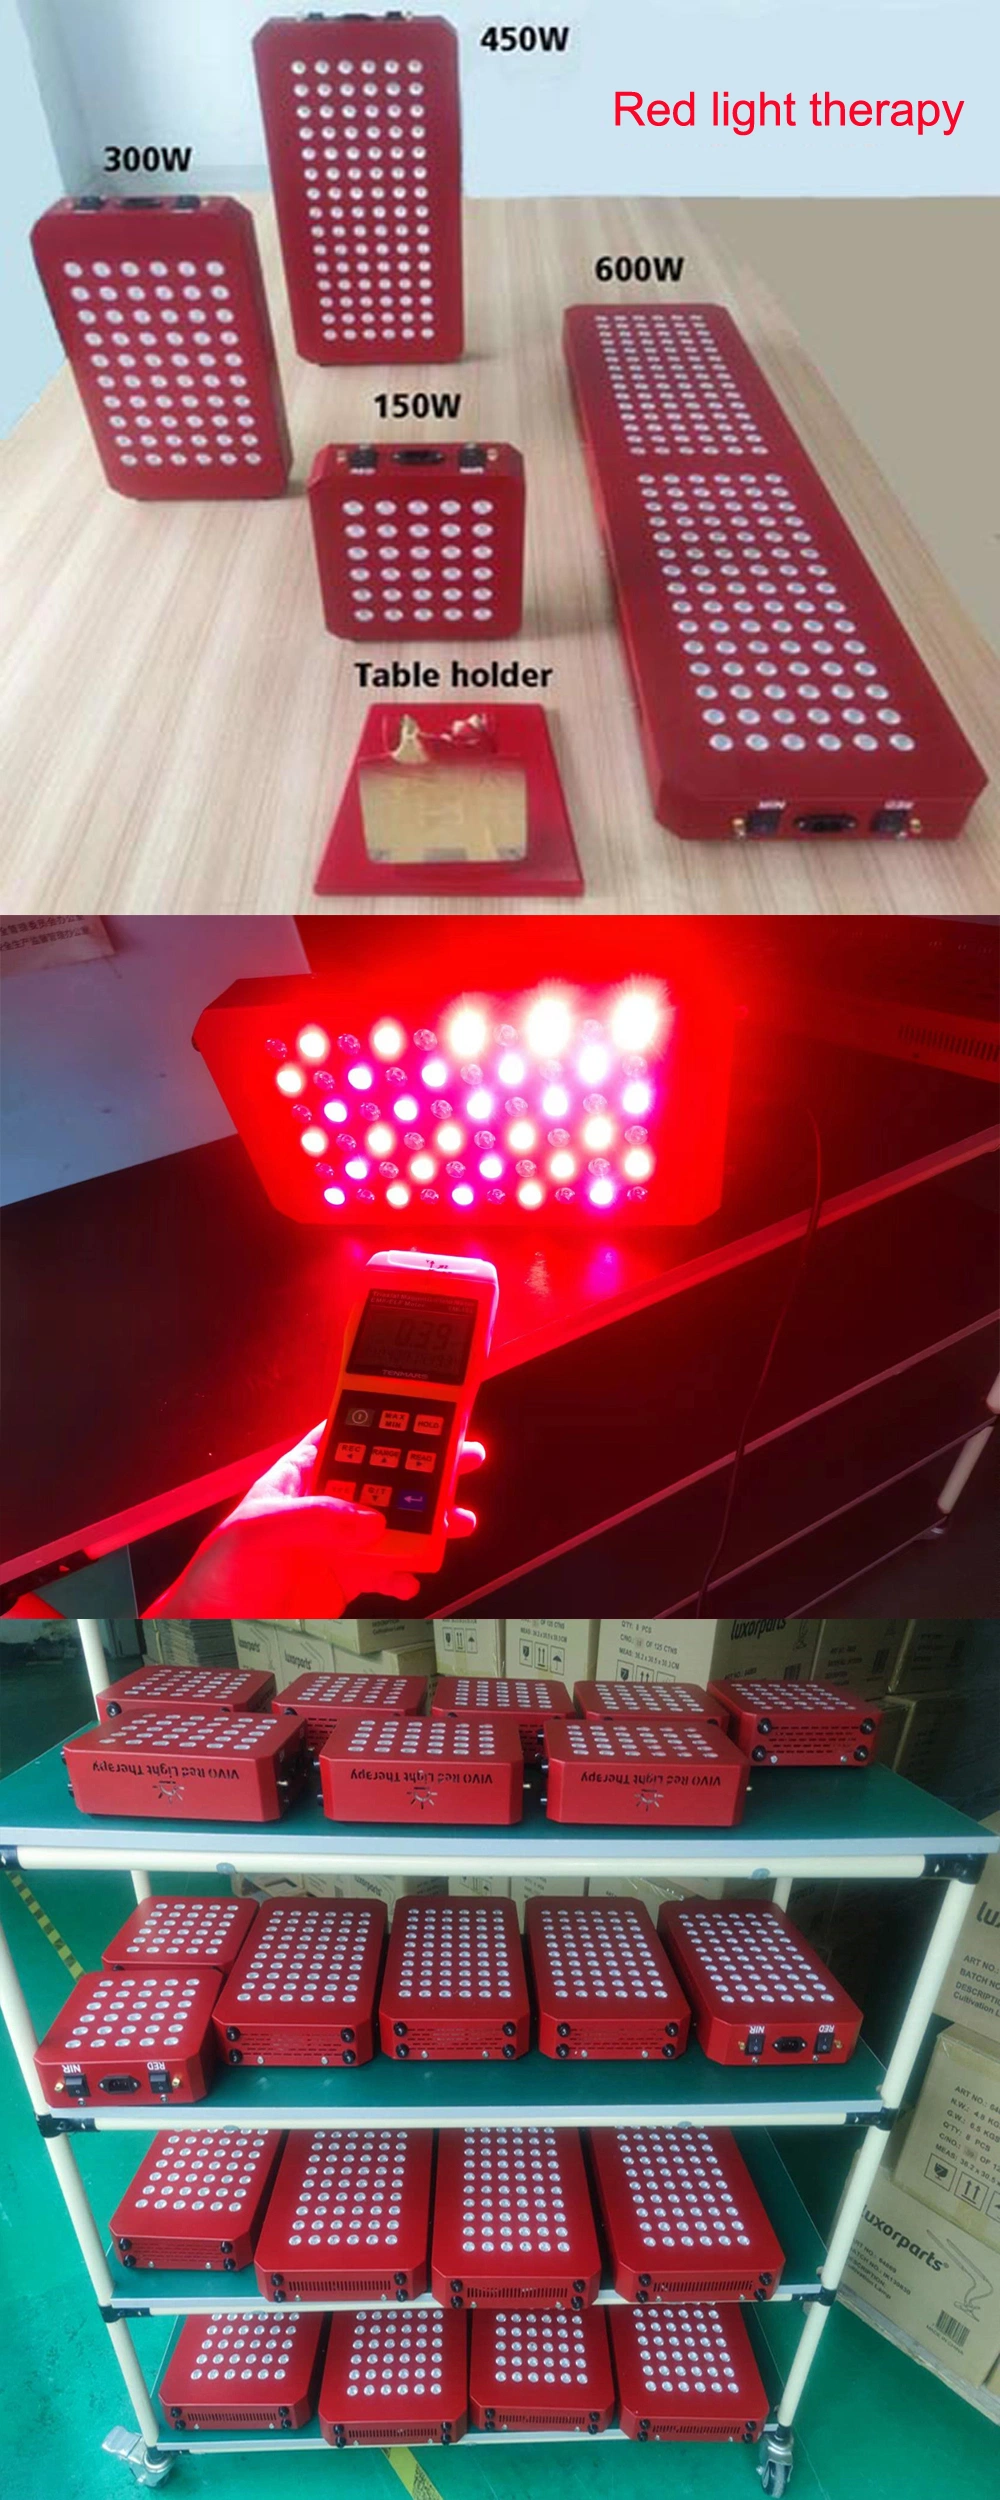 Beauty Care SPA 45W 150W 600W Infrared Red Light Therapy 660nm 850nm Near Infrared Red Light Therapy